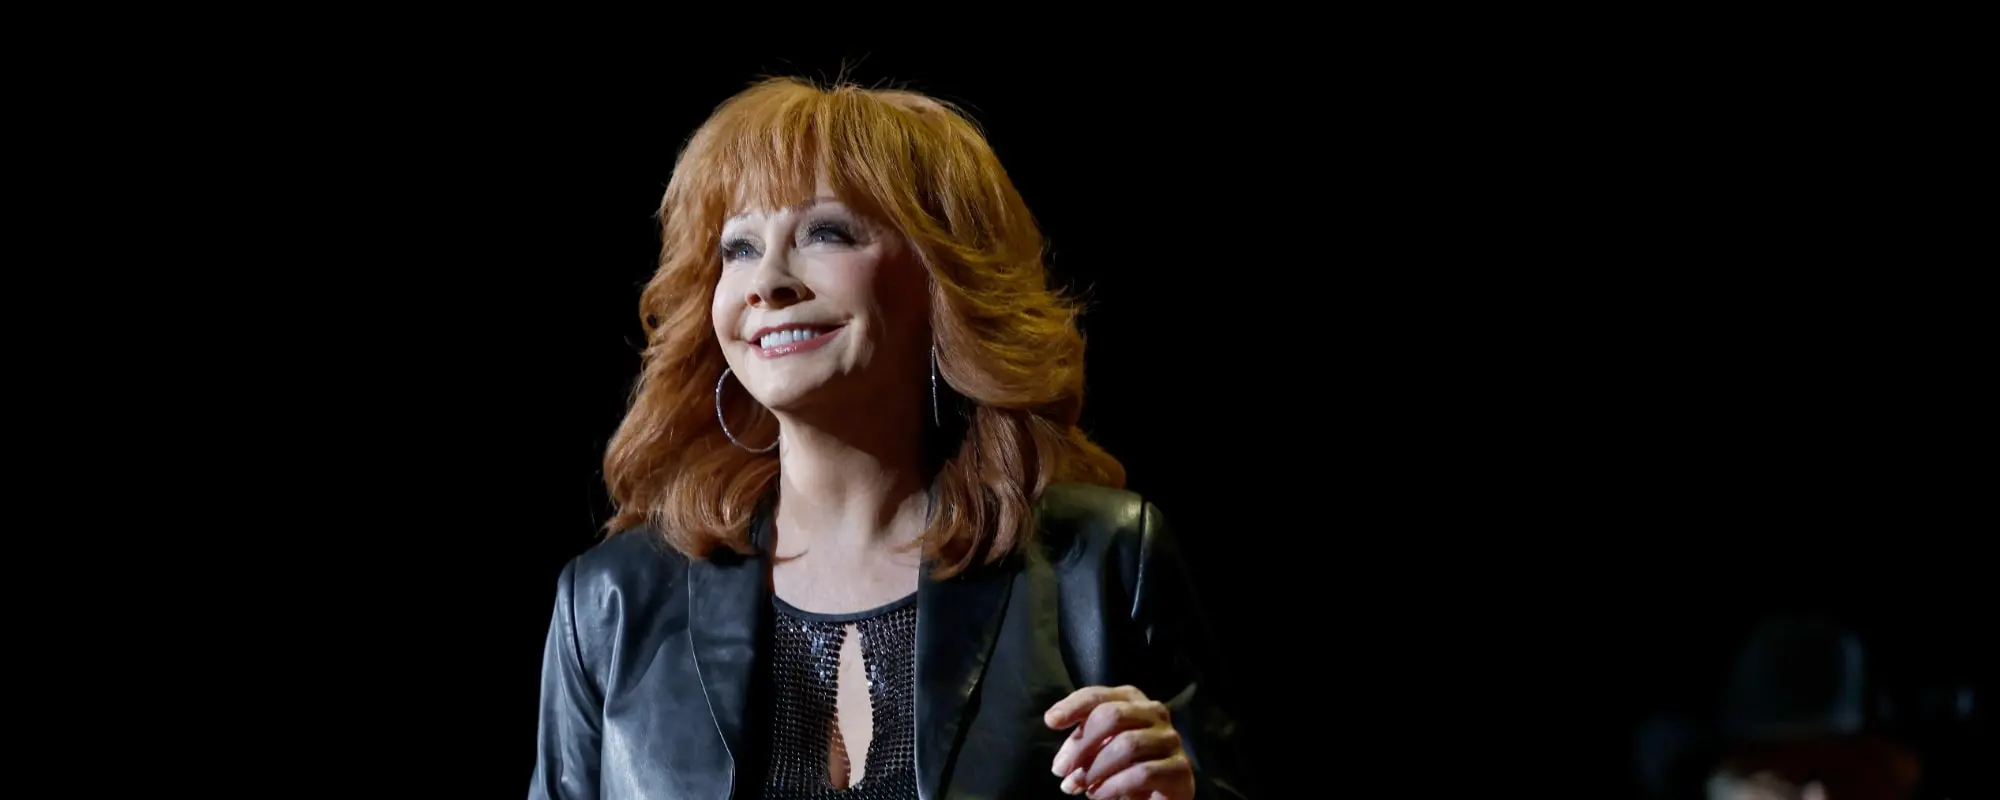 3 Reba McEntire Songs That Prove She’s The Queen of Country